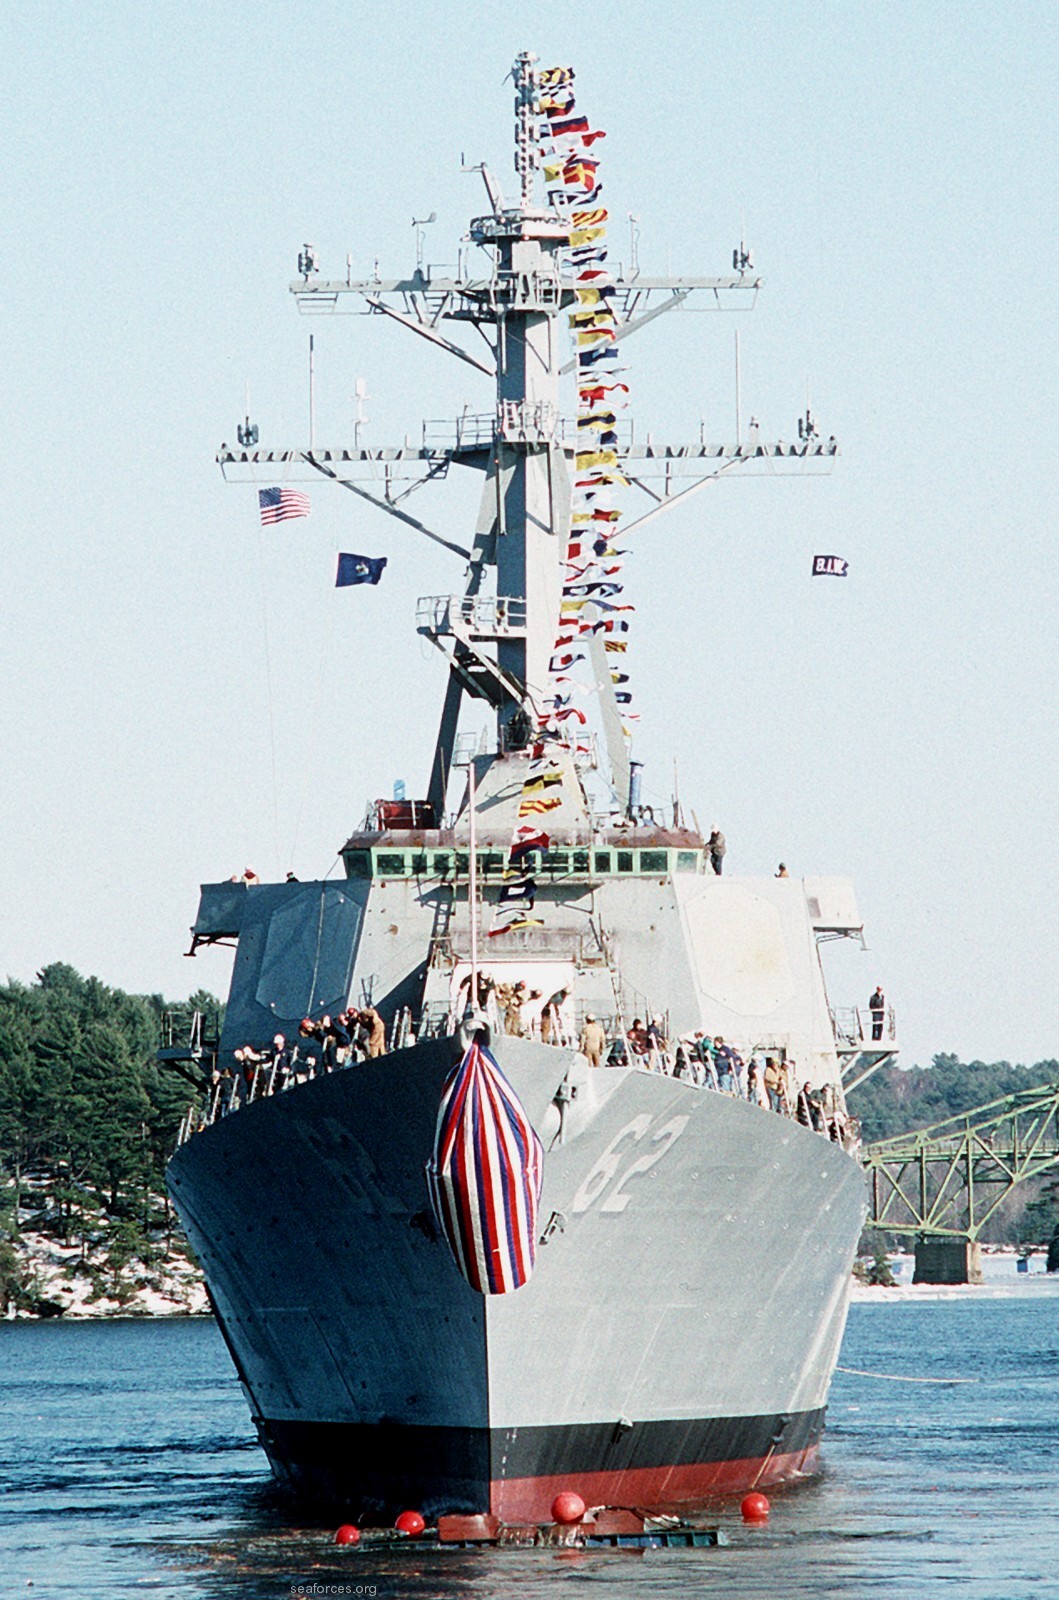 ddg-62 uss fitzgerald guided missile destroyer 1994 111 christening ceremony launching